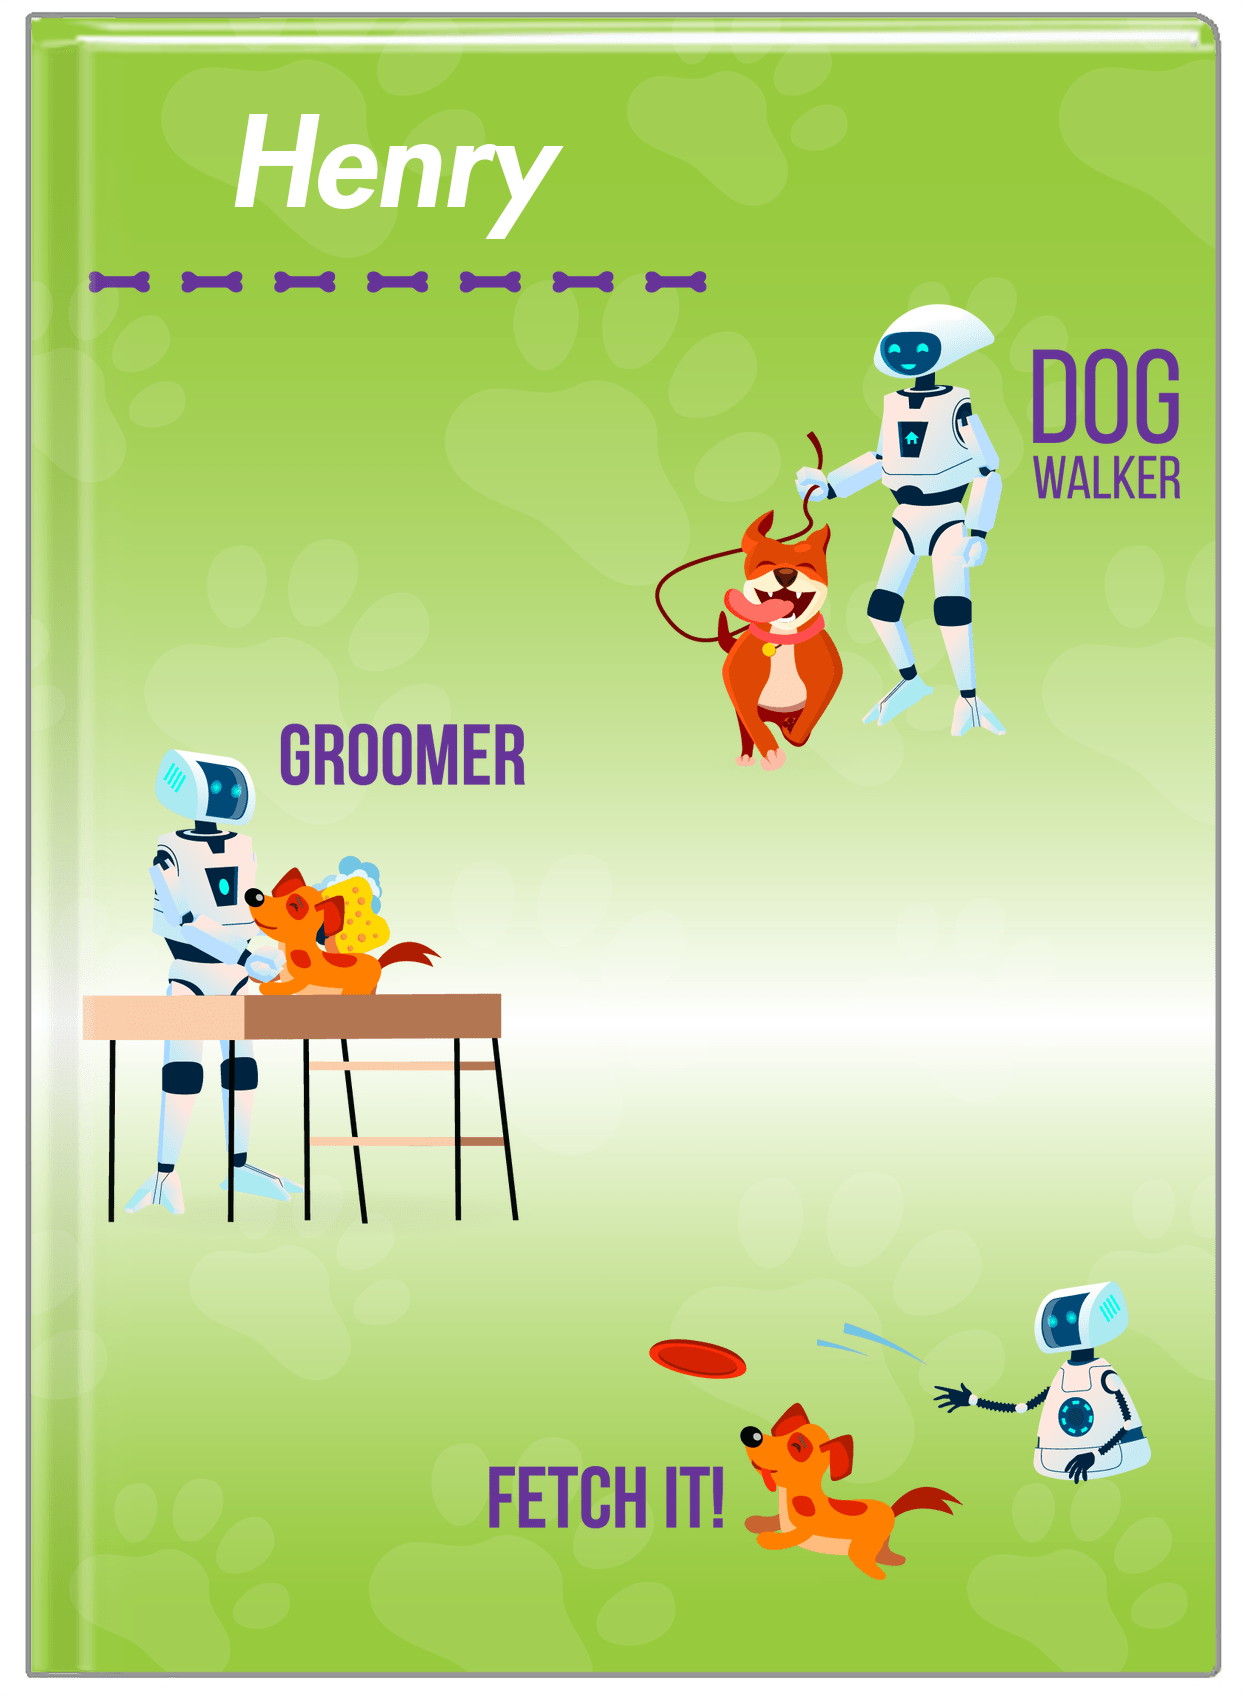 Personalized Robots Journal VIII - Canine Assistant - Green Background - Front View